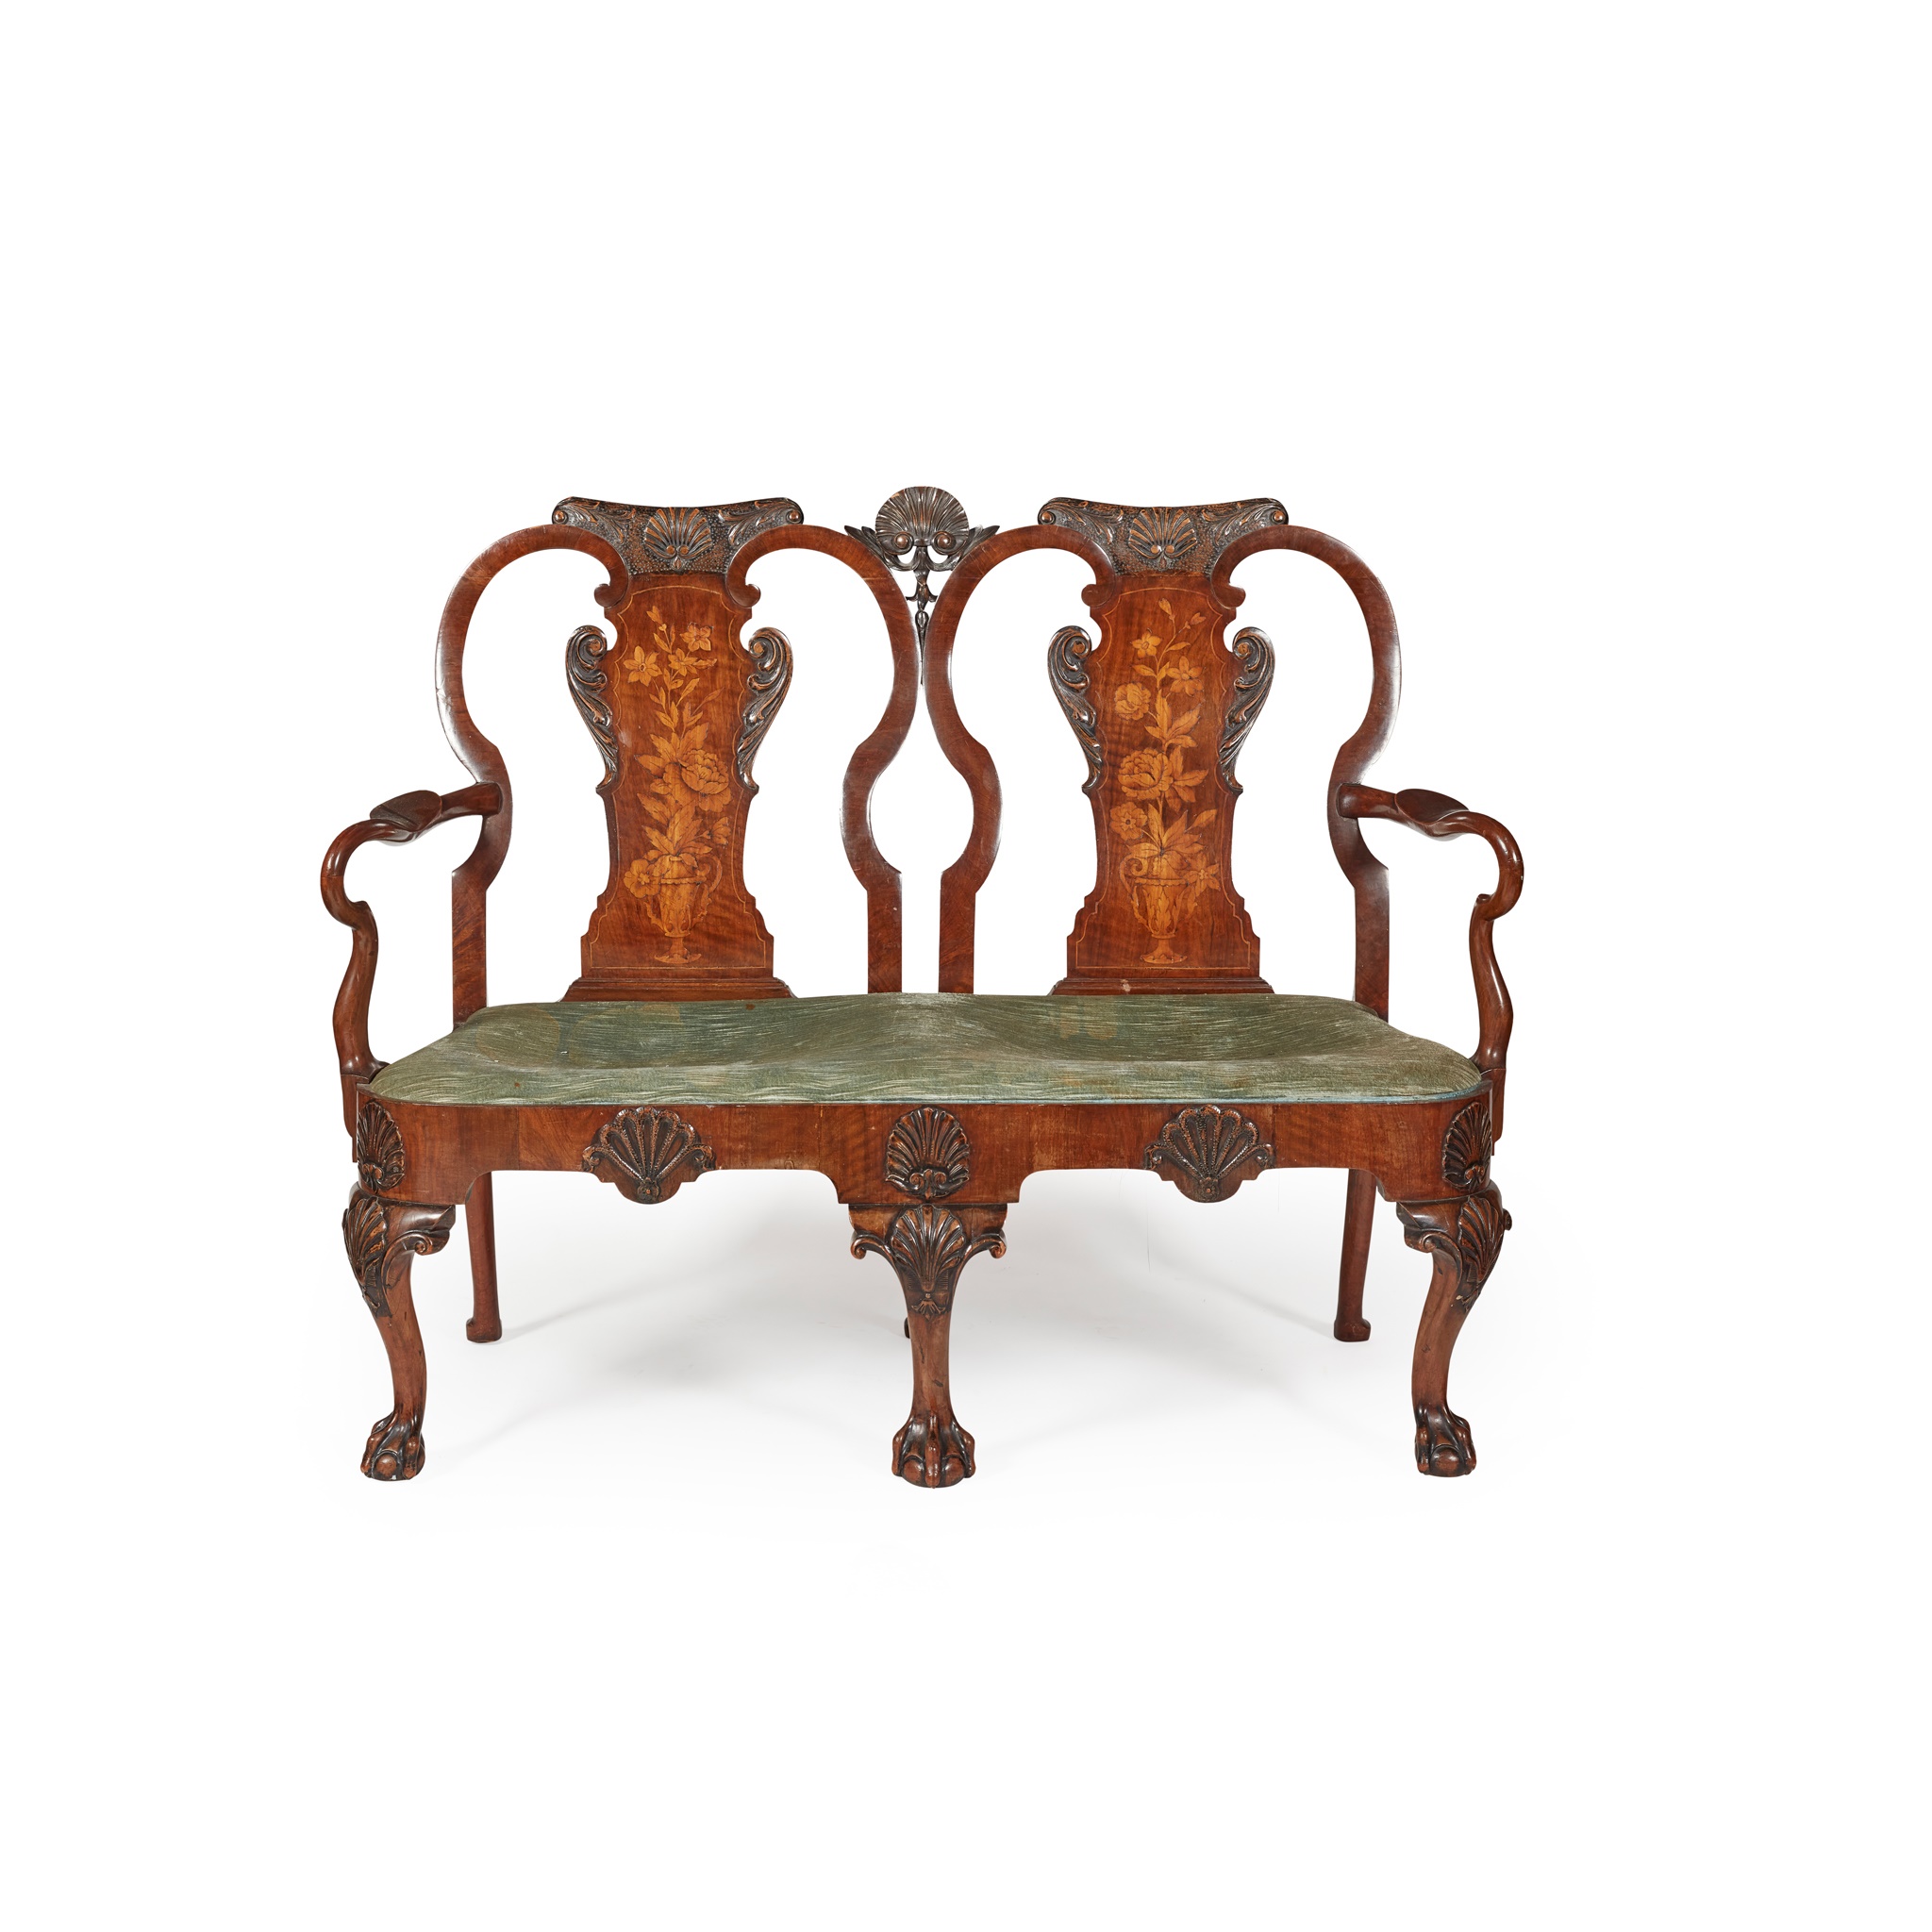 GEORGE I STYLE WALNUT AND MARQUETRY DOUBLE CHAIRBACK SETTEE 19TH CENTURY